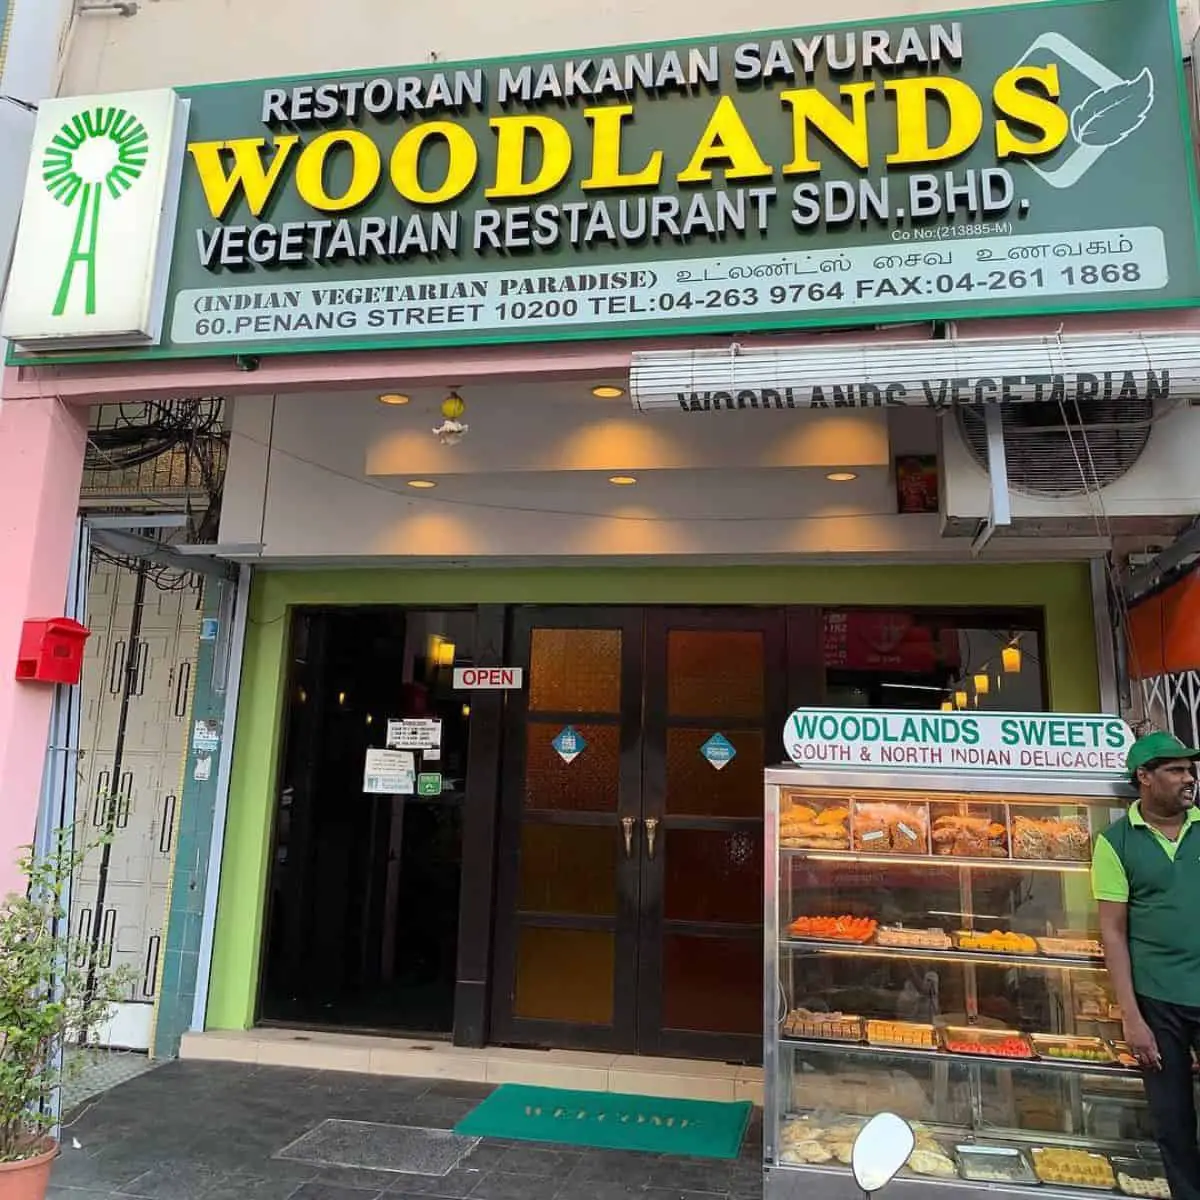 A front view photo of Woodlands Vegetarian Restaurant in Penang with Indian sweets on display